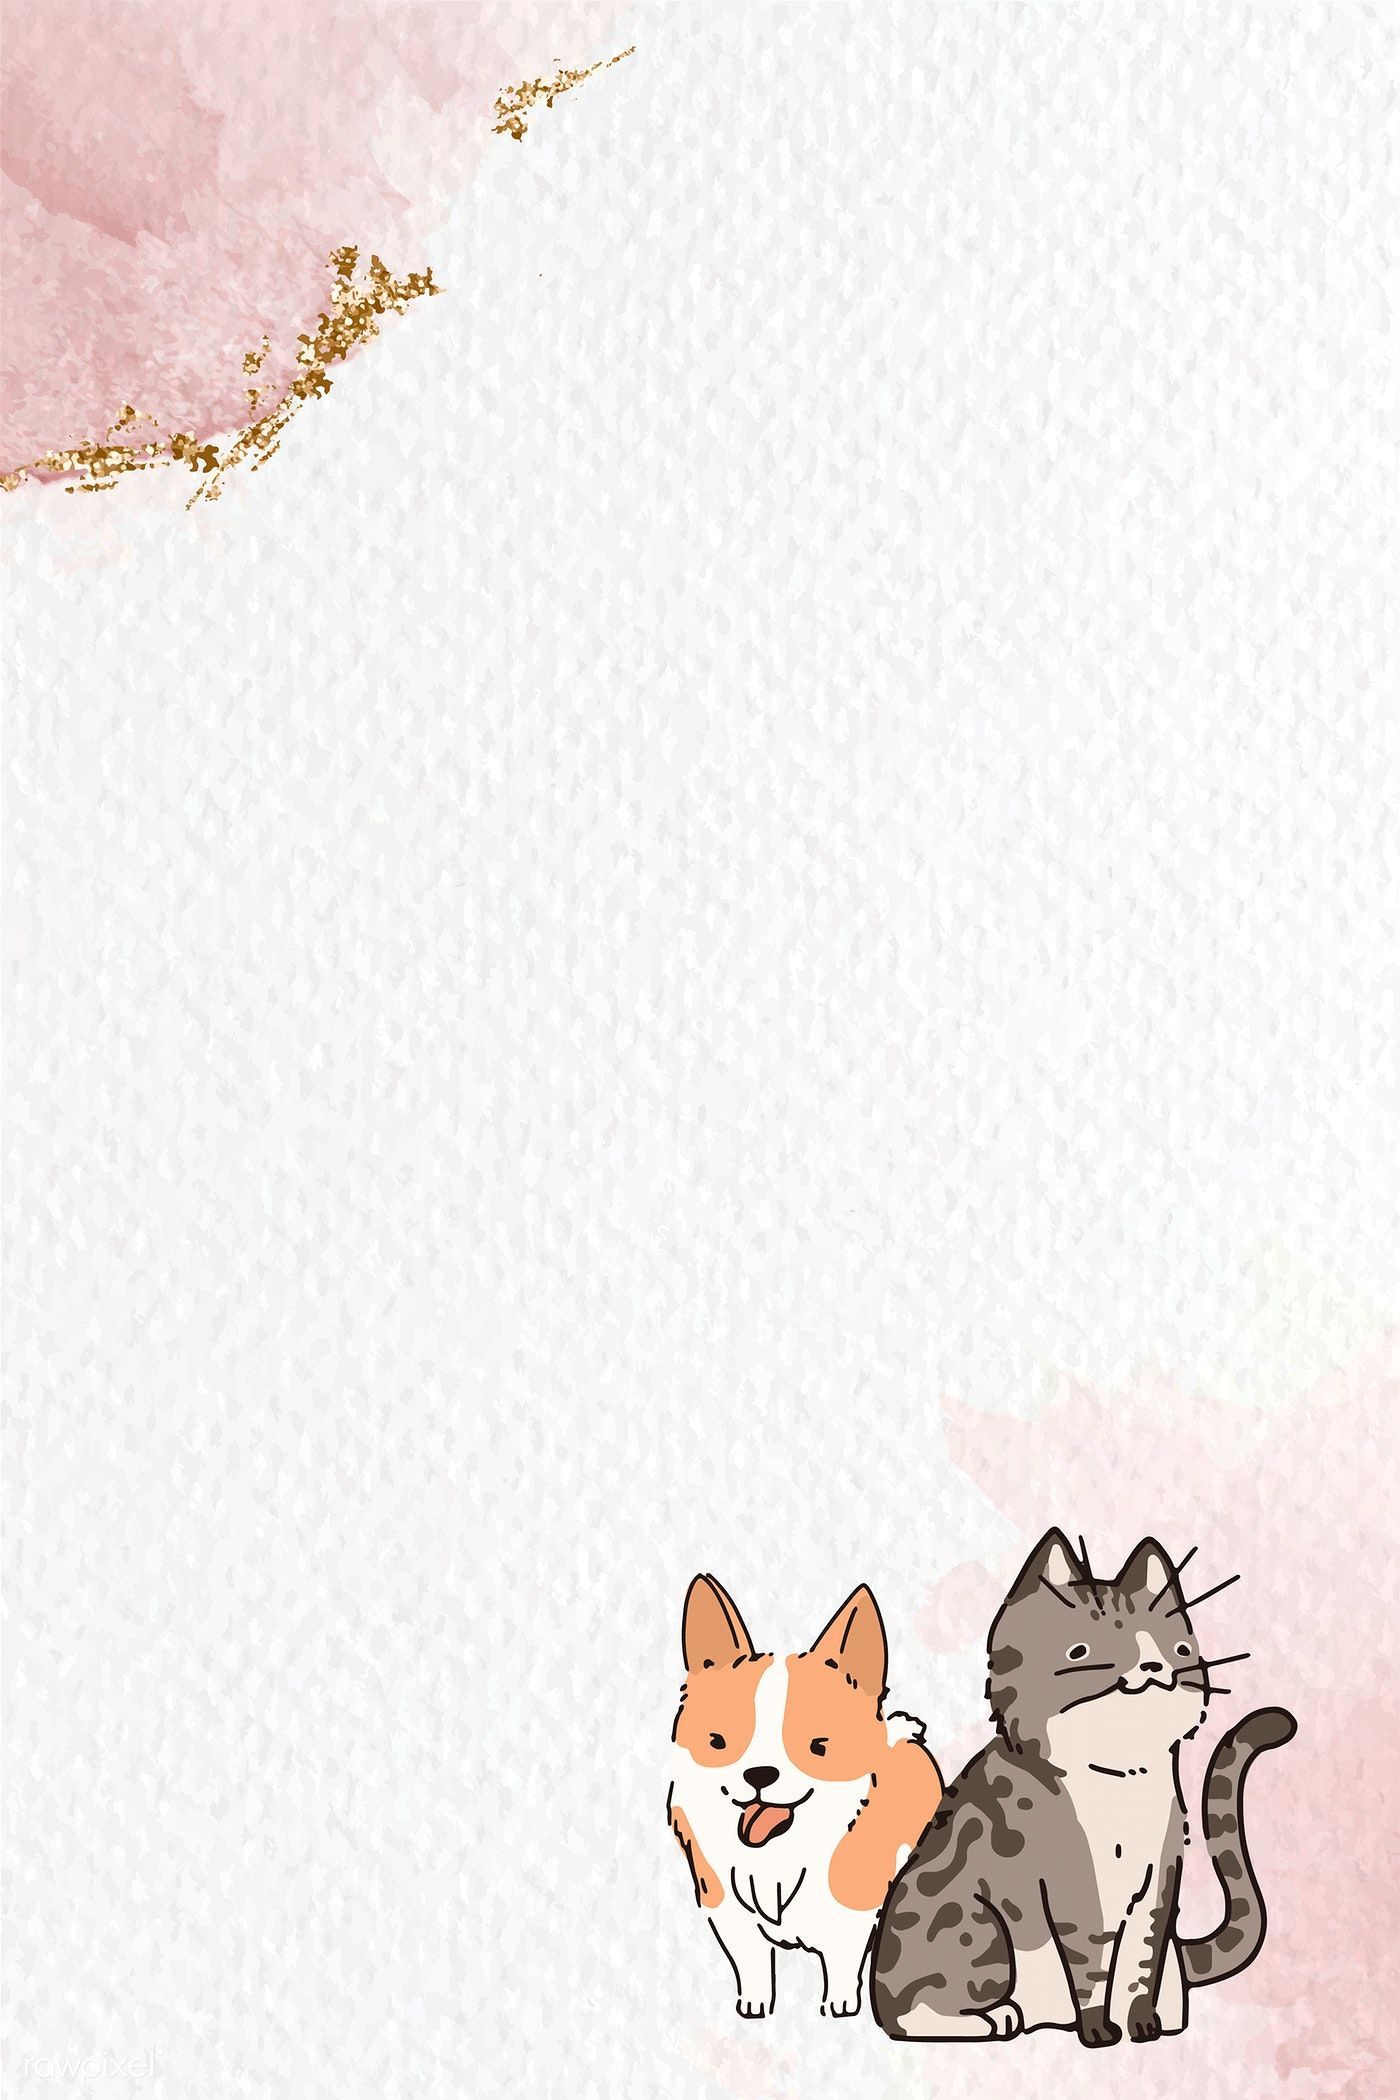 Dog and cat lover pattern background vector / Adj. Background patterns, Cat background, Cute cartoon wallpaper